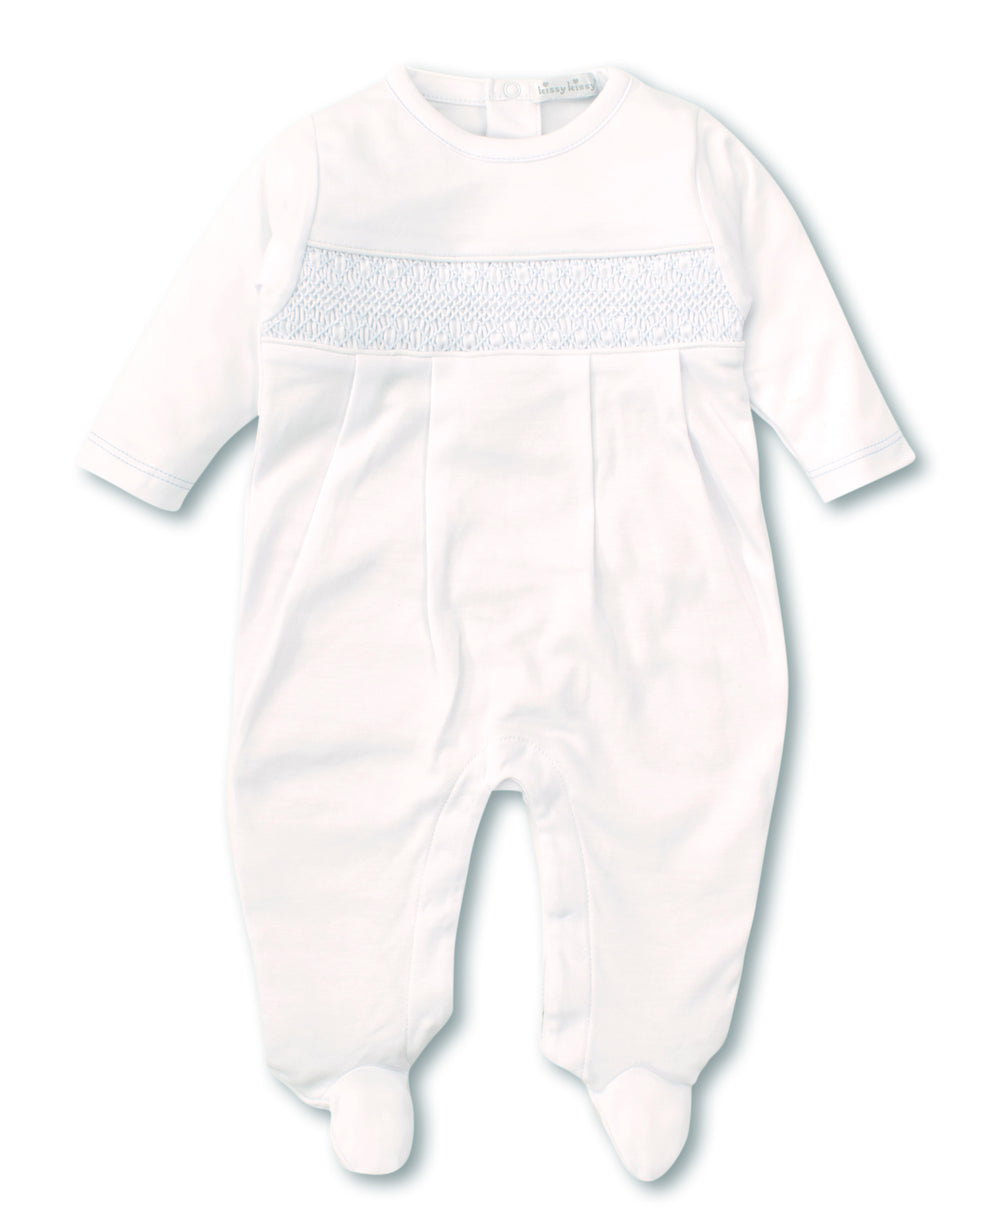 Kissy Footie with Hand Smocking- White/Lt Blue